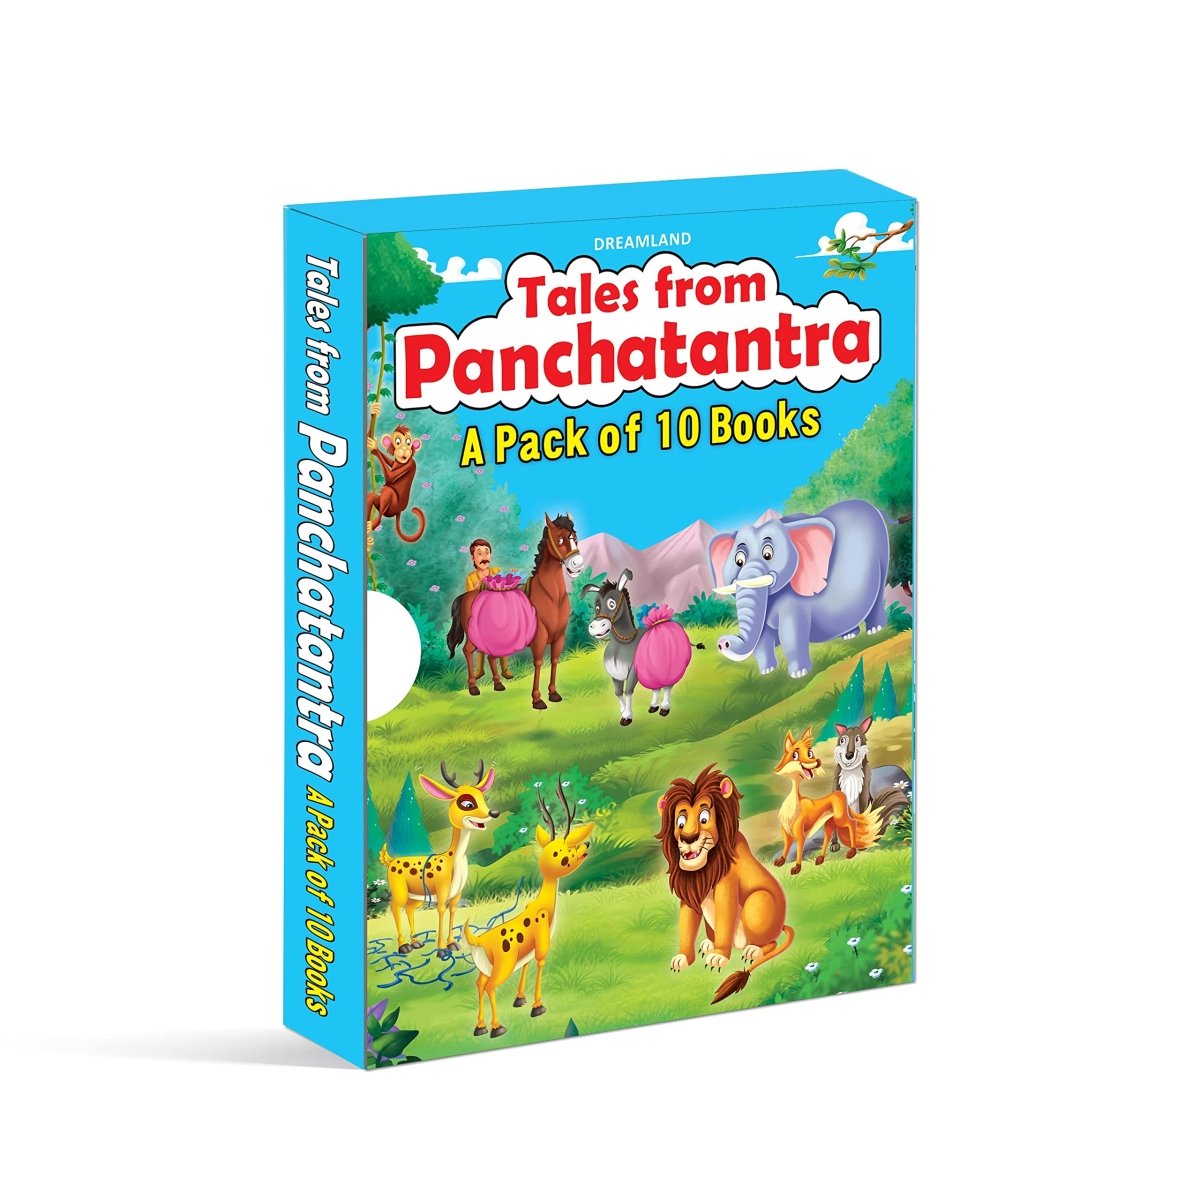 Dreamland Publications Dreamland Tales From Panchatantra (Pack of 10 Books) - 9789388416344